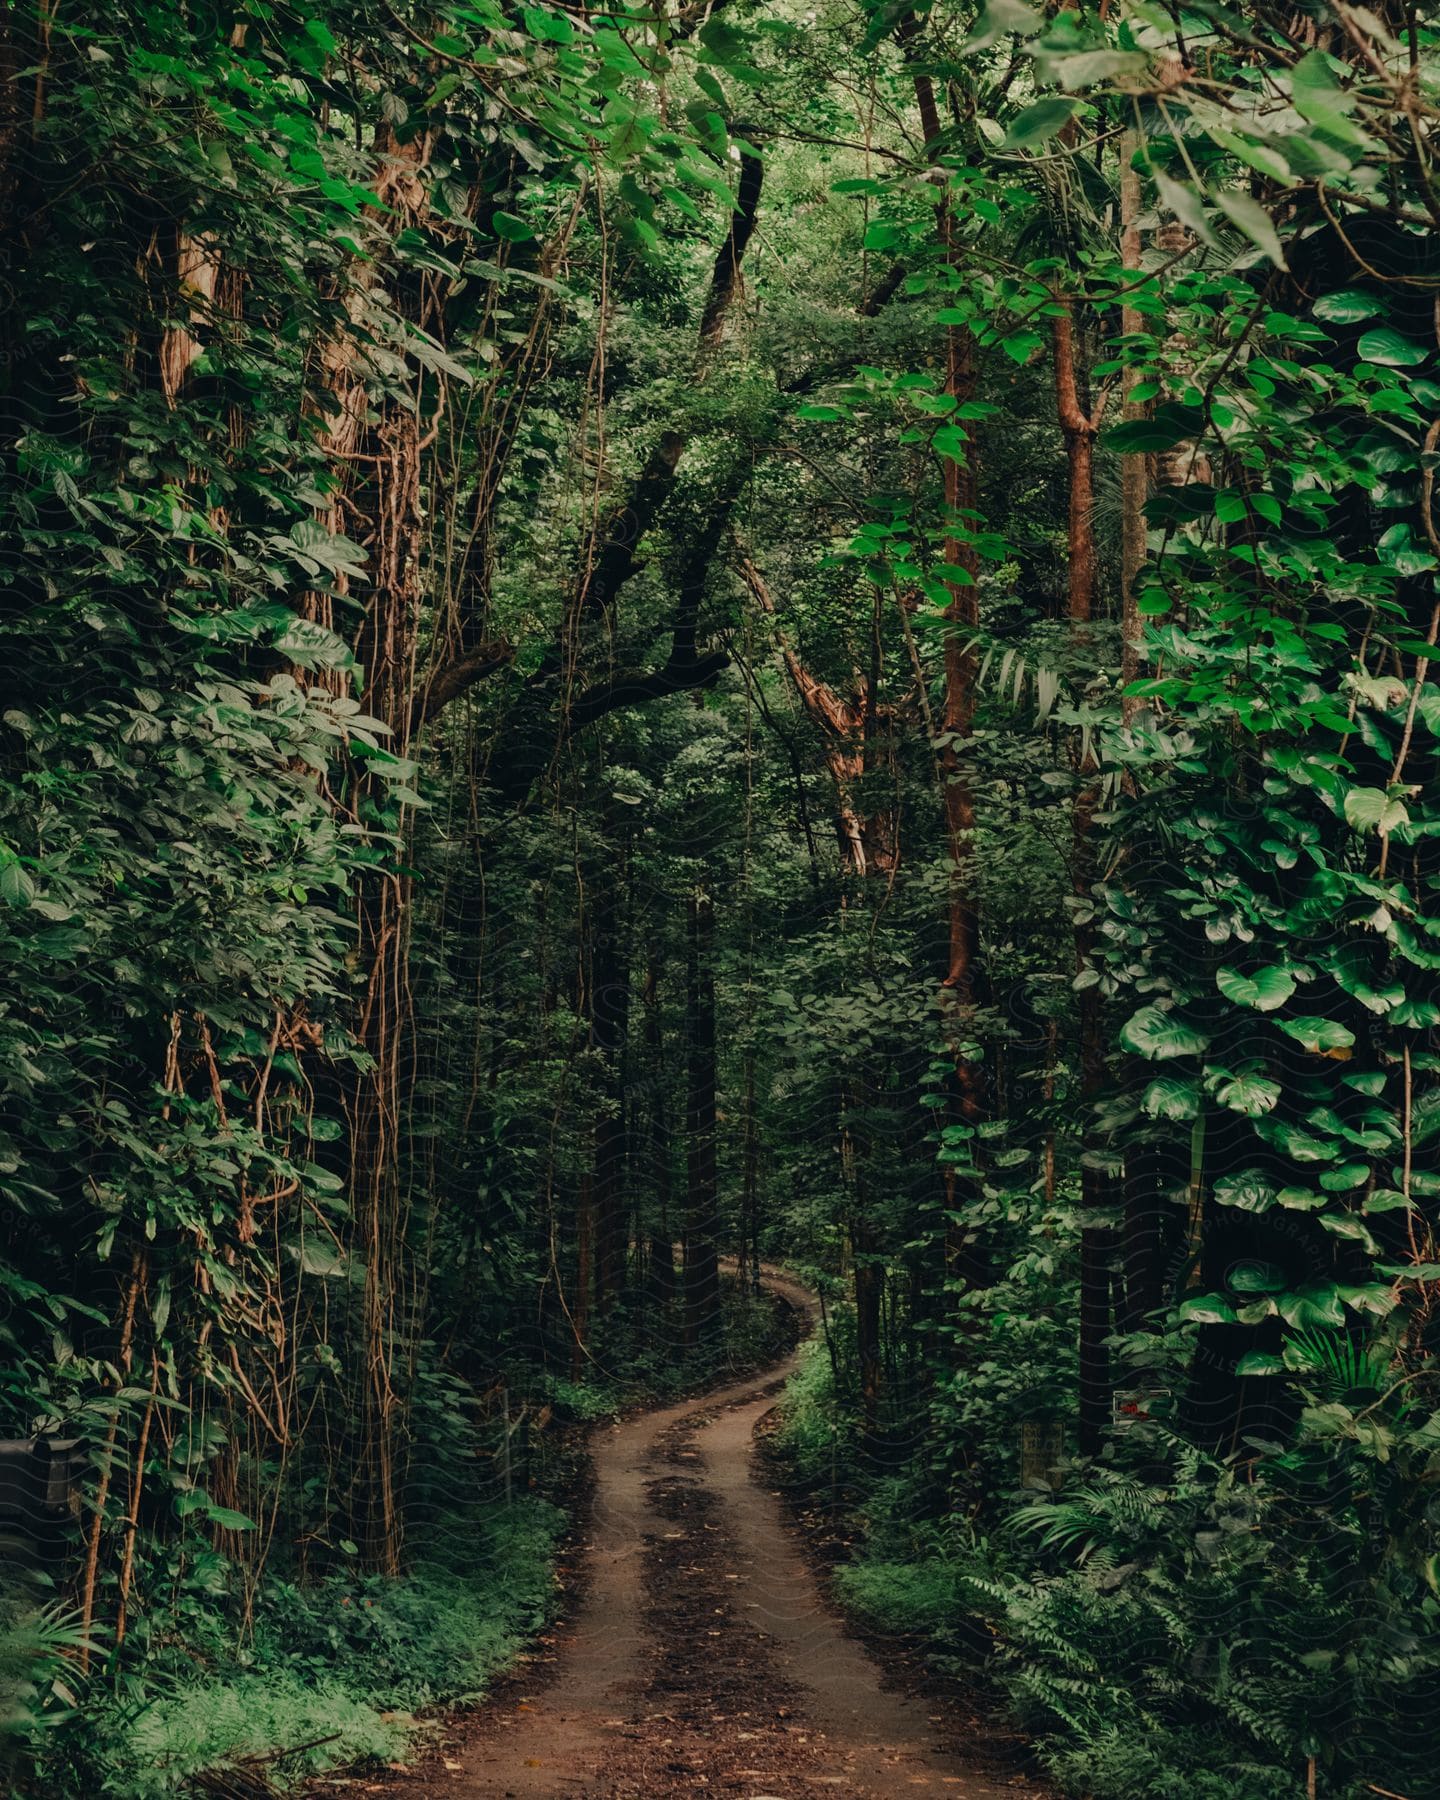 A dense forest with tall trees vines and a dirt road winding through